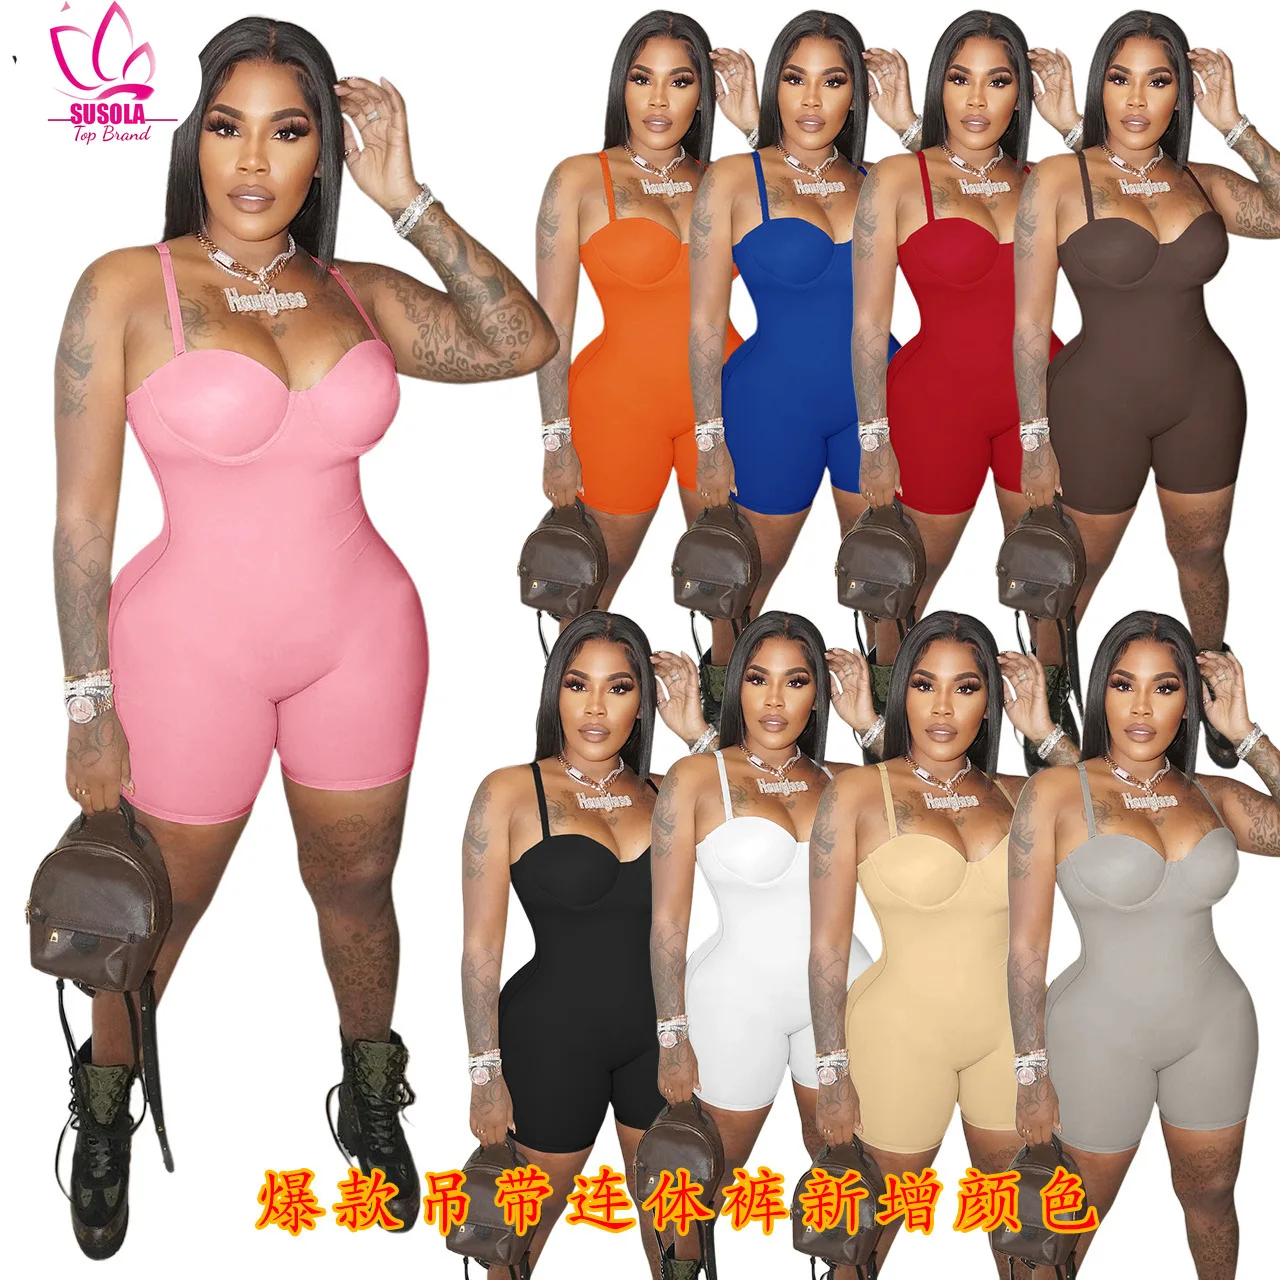 

SUSOLA Body-Shaping Rompers Women Popular Classy Sheath Slim Sexy Cleavage Party Playsuit Solid Strapless Camisole Clubwear Hot